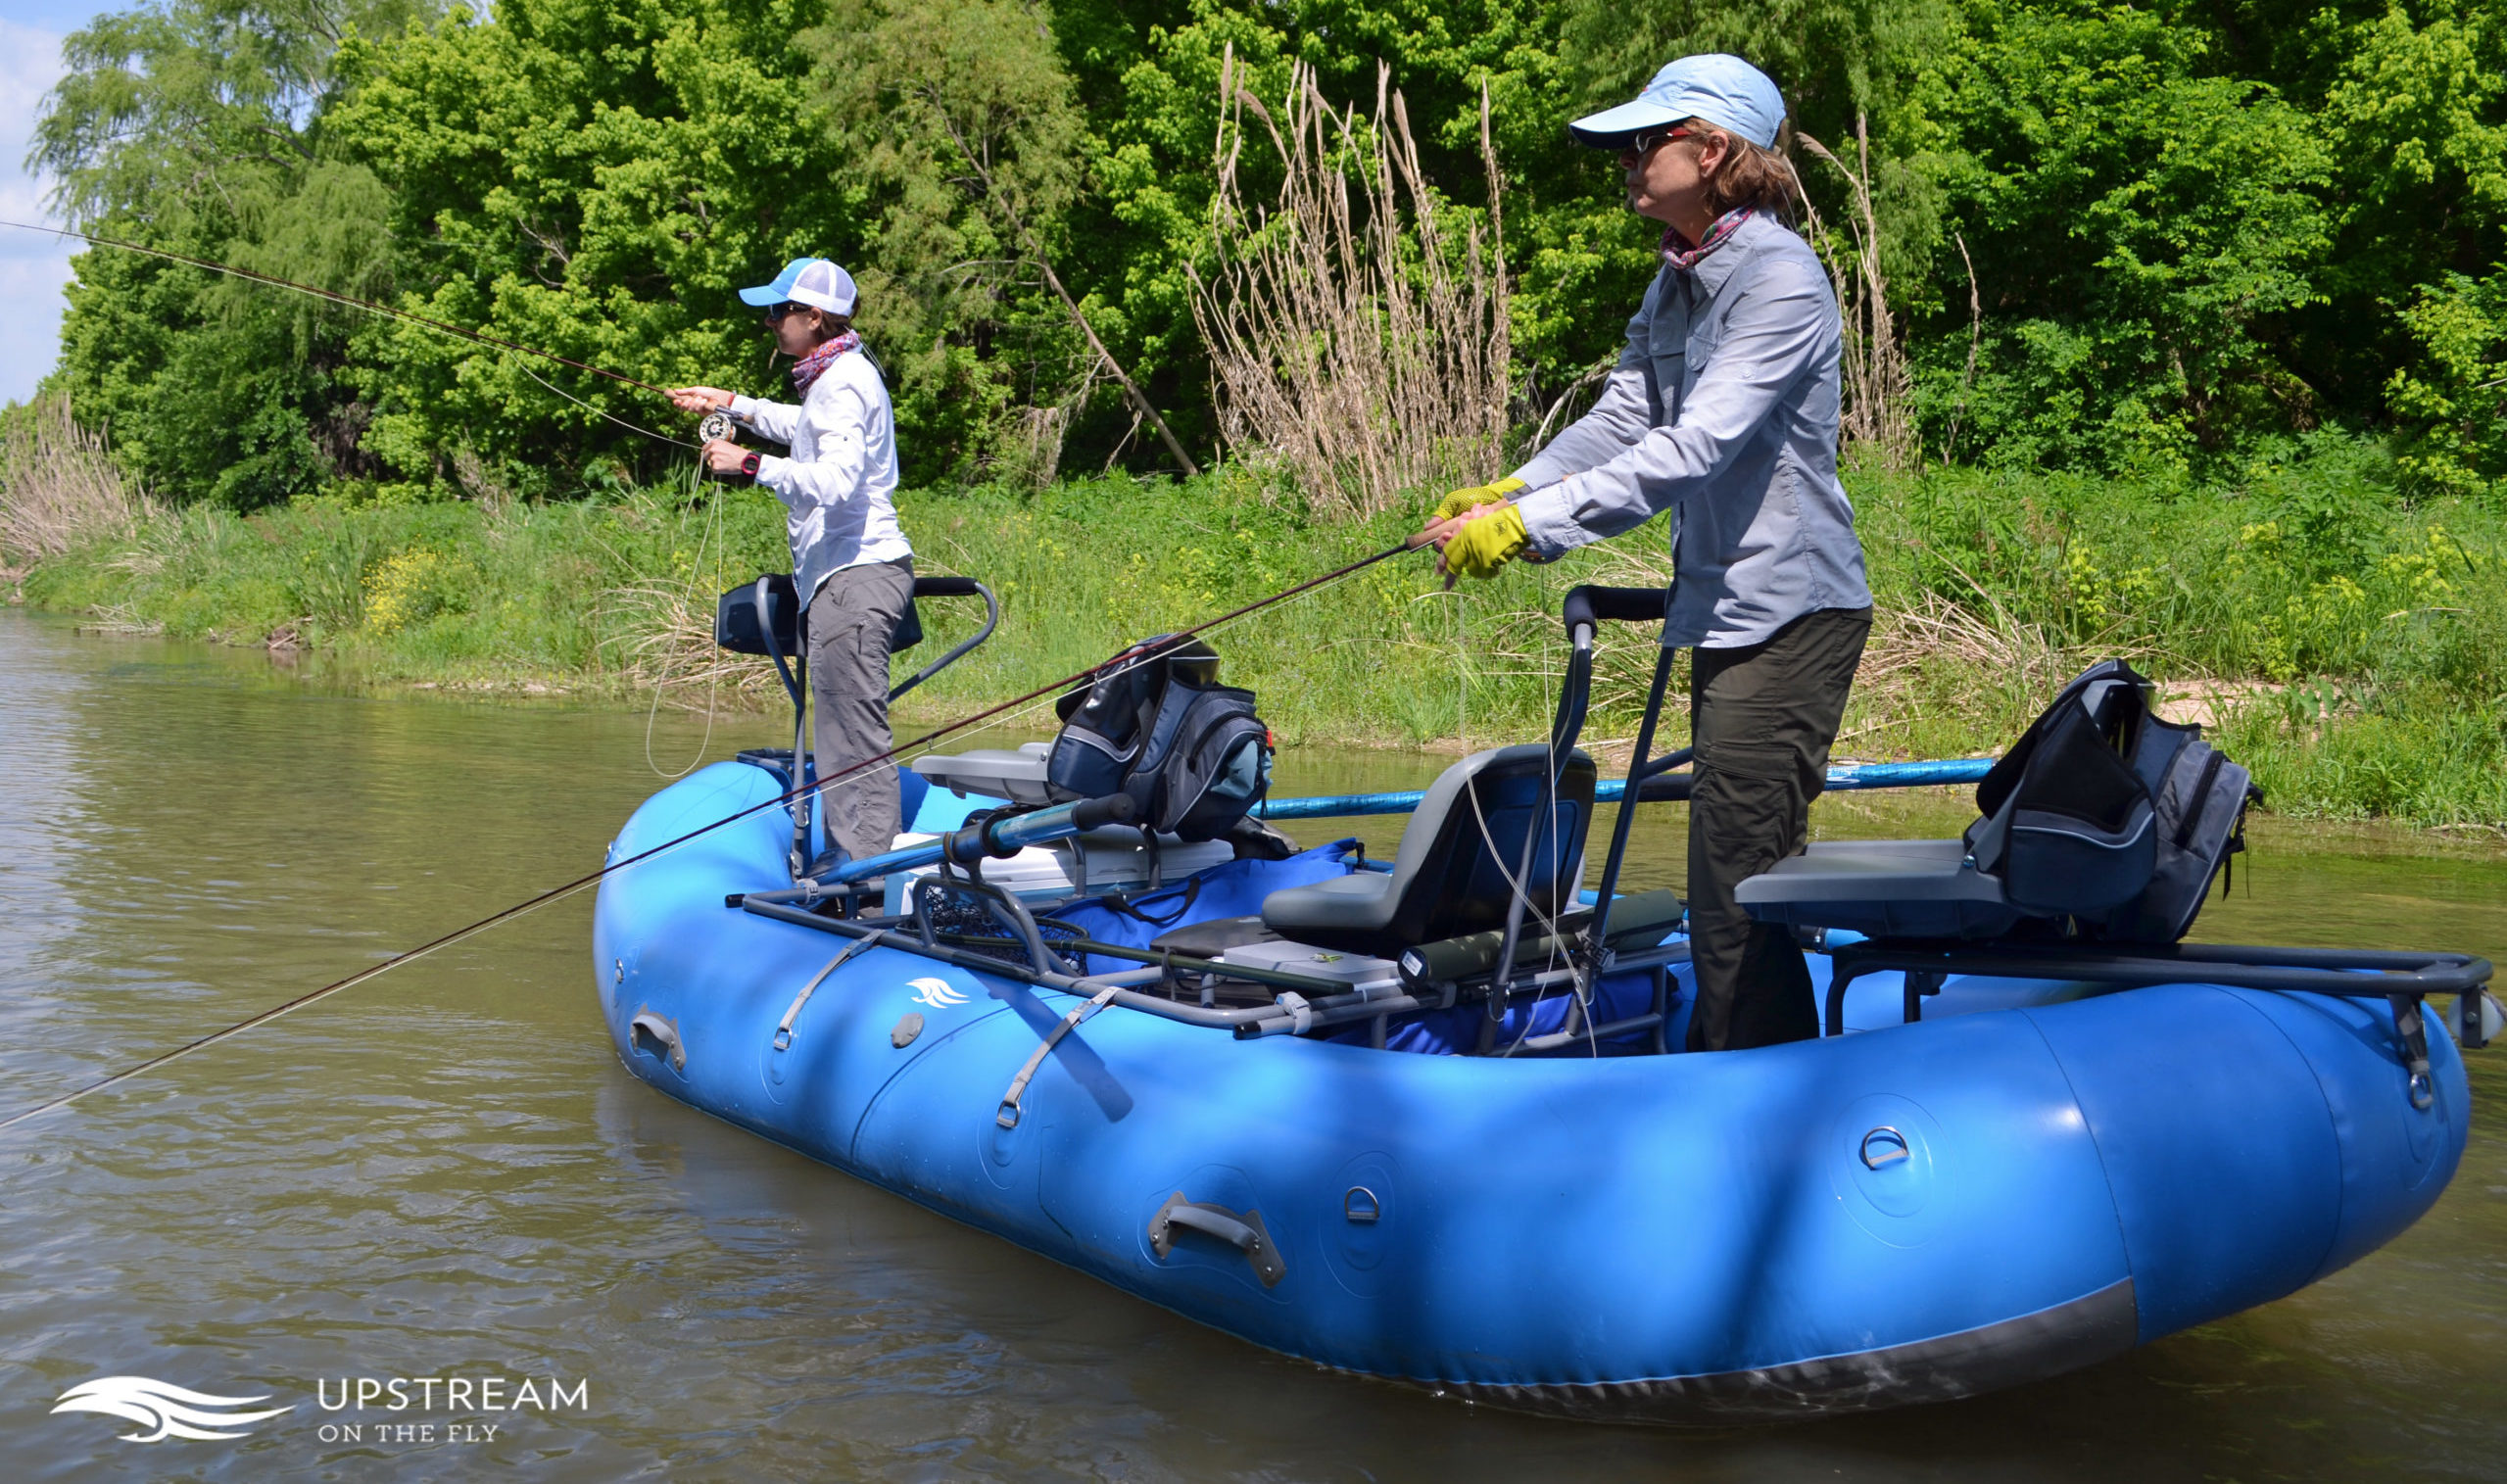 The Raft for North Texas Fly Fishing Guide Greg Welander of Upstream On The Fly